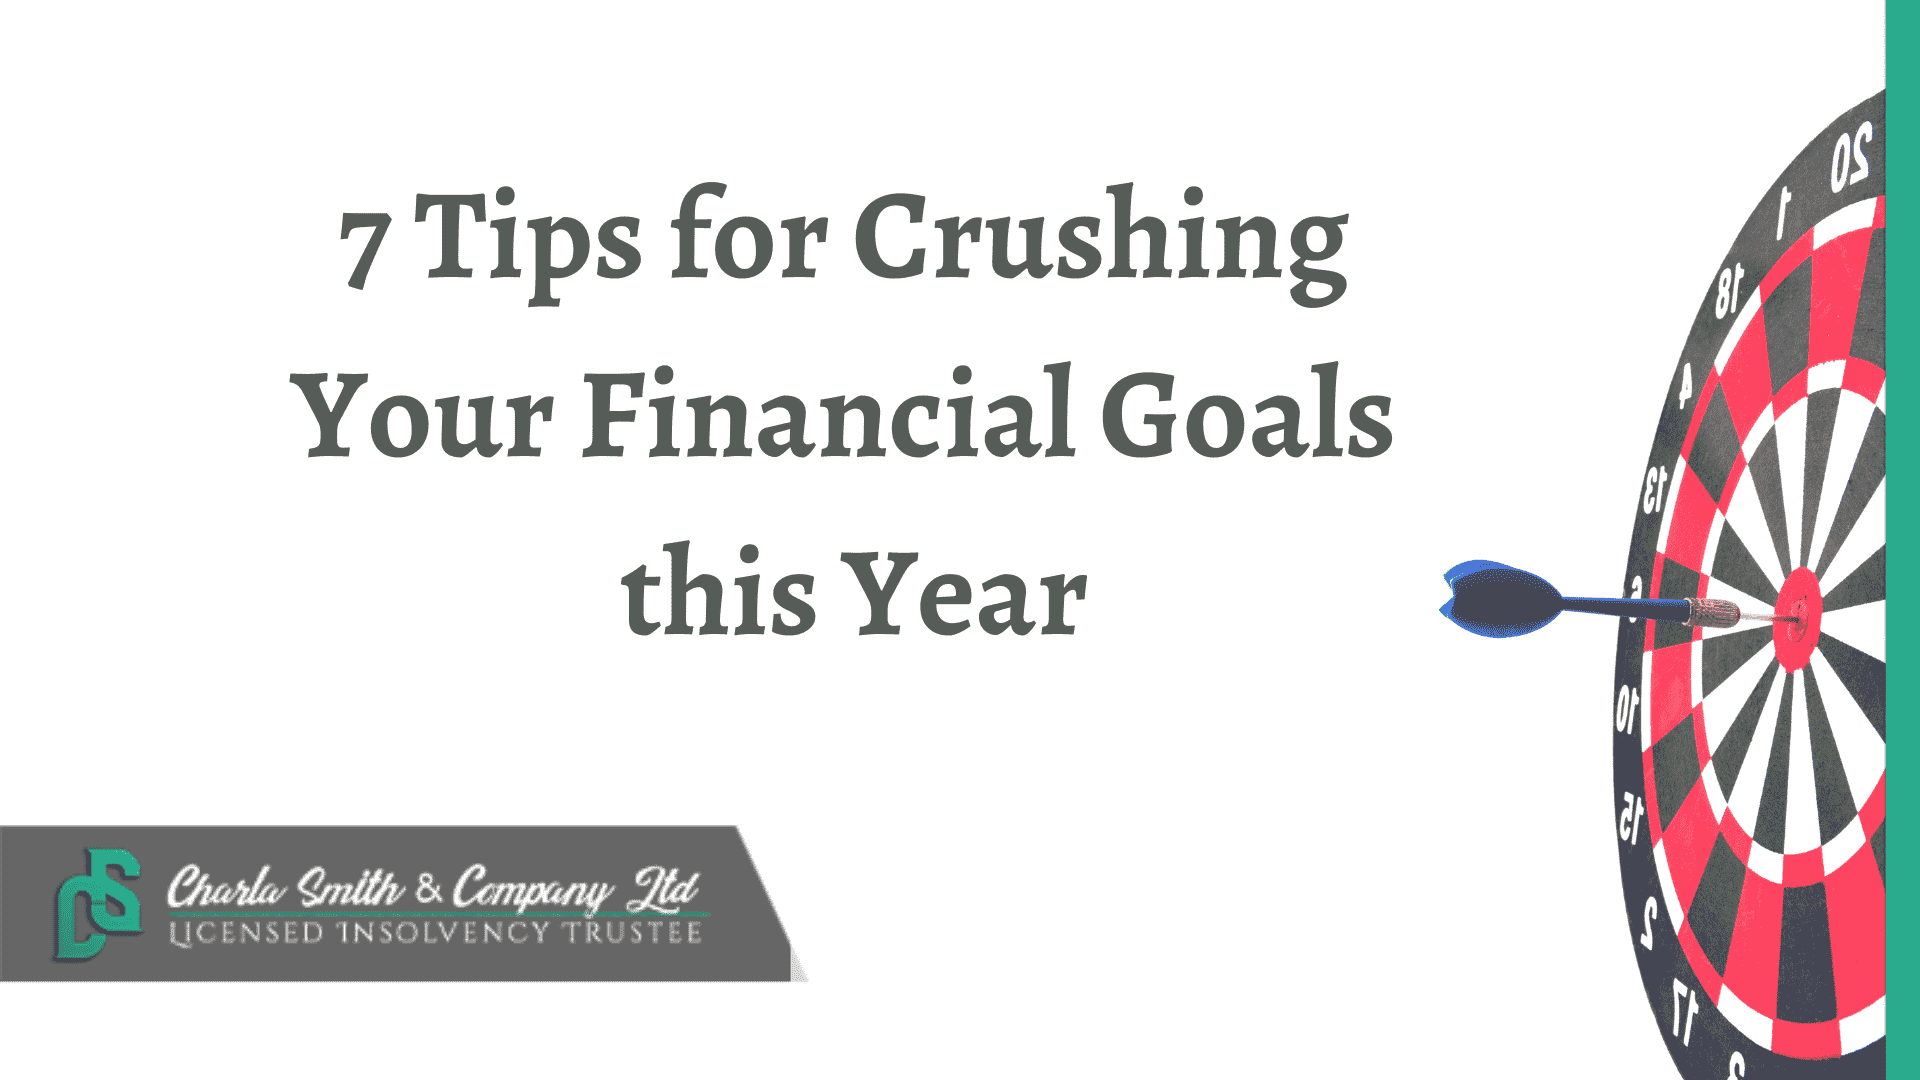 7 Tips for Crushing Your Financial Goals This Year